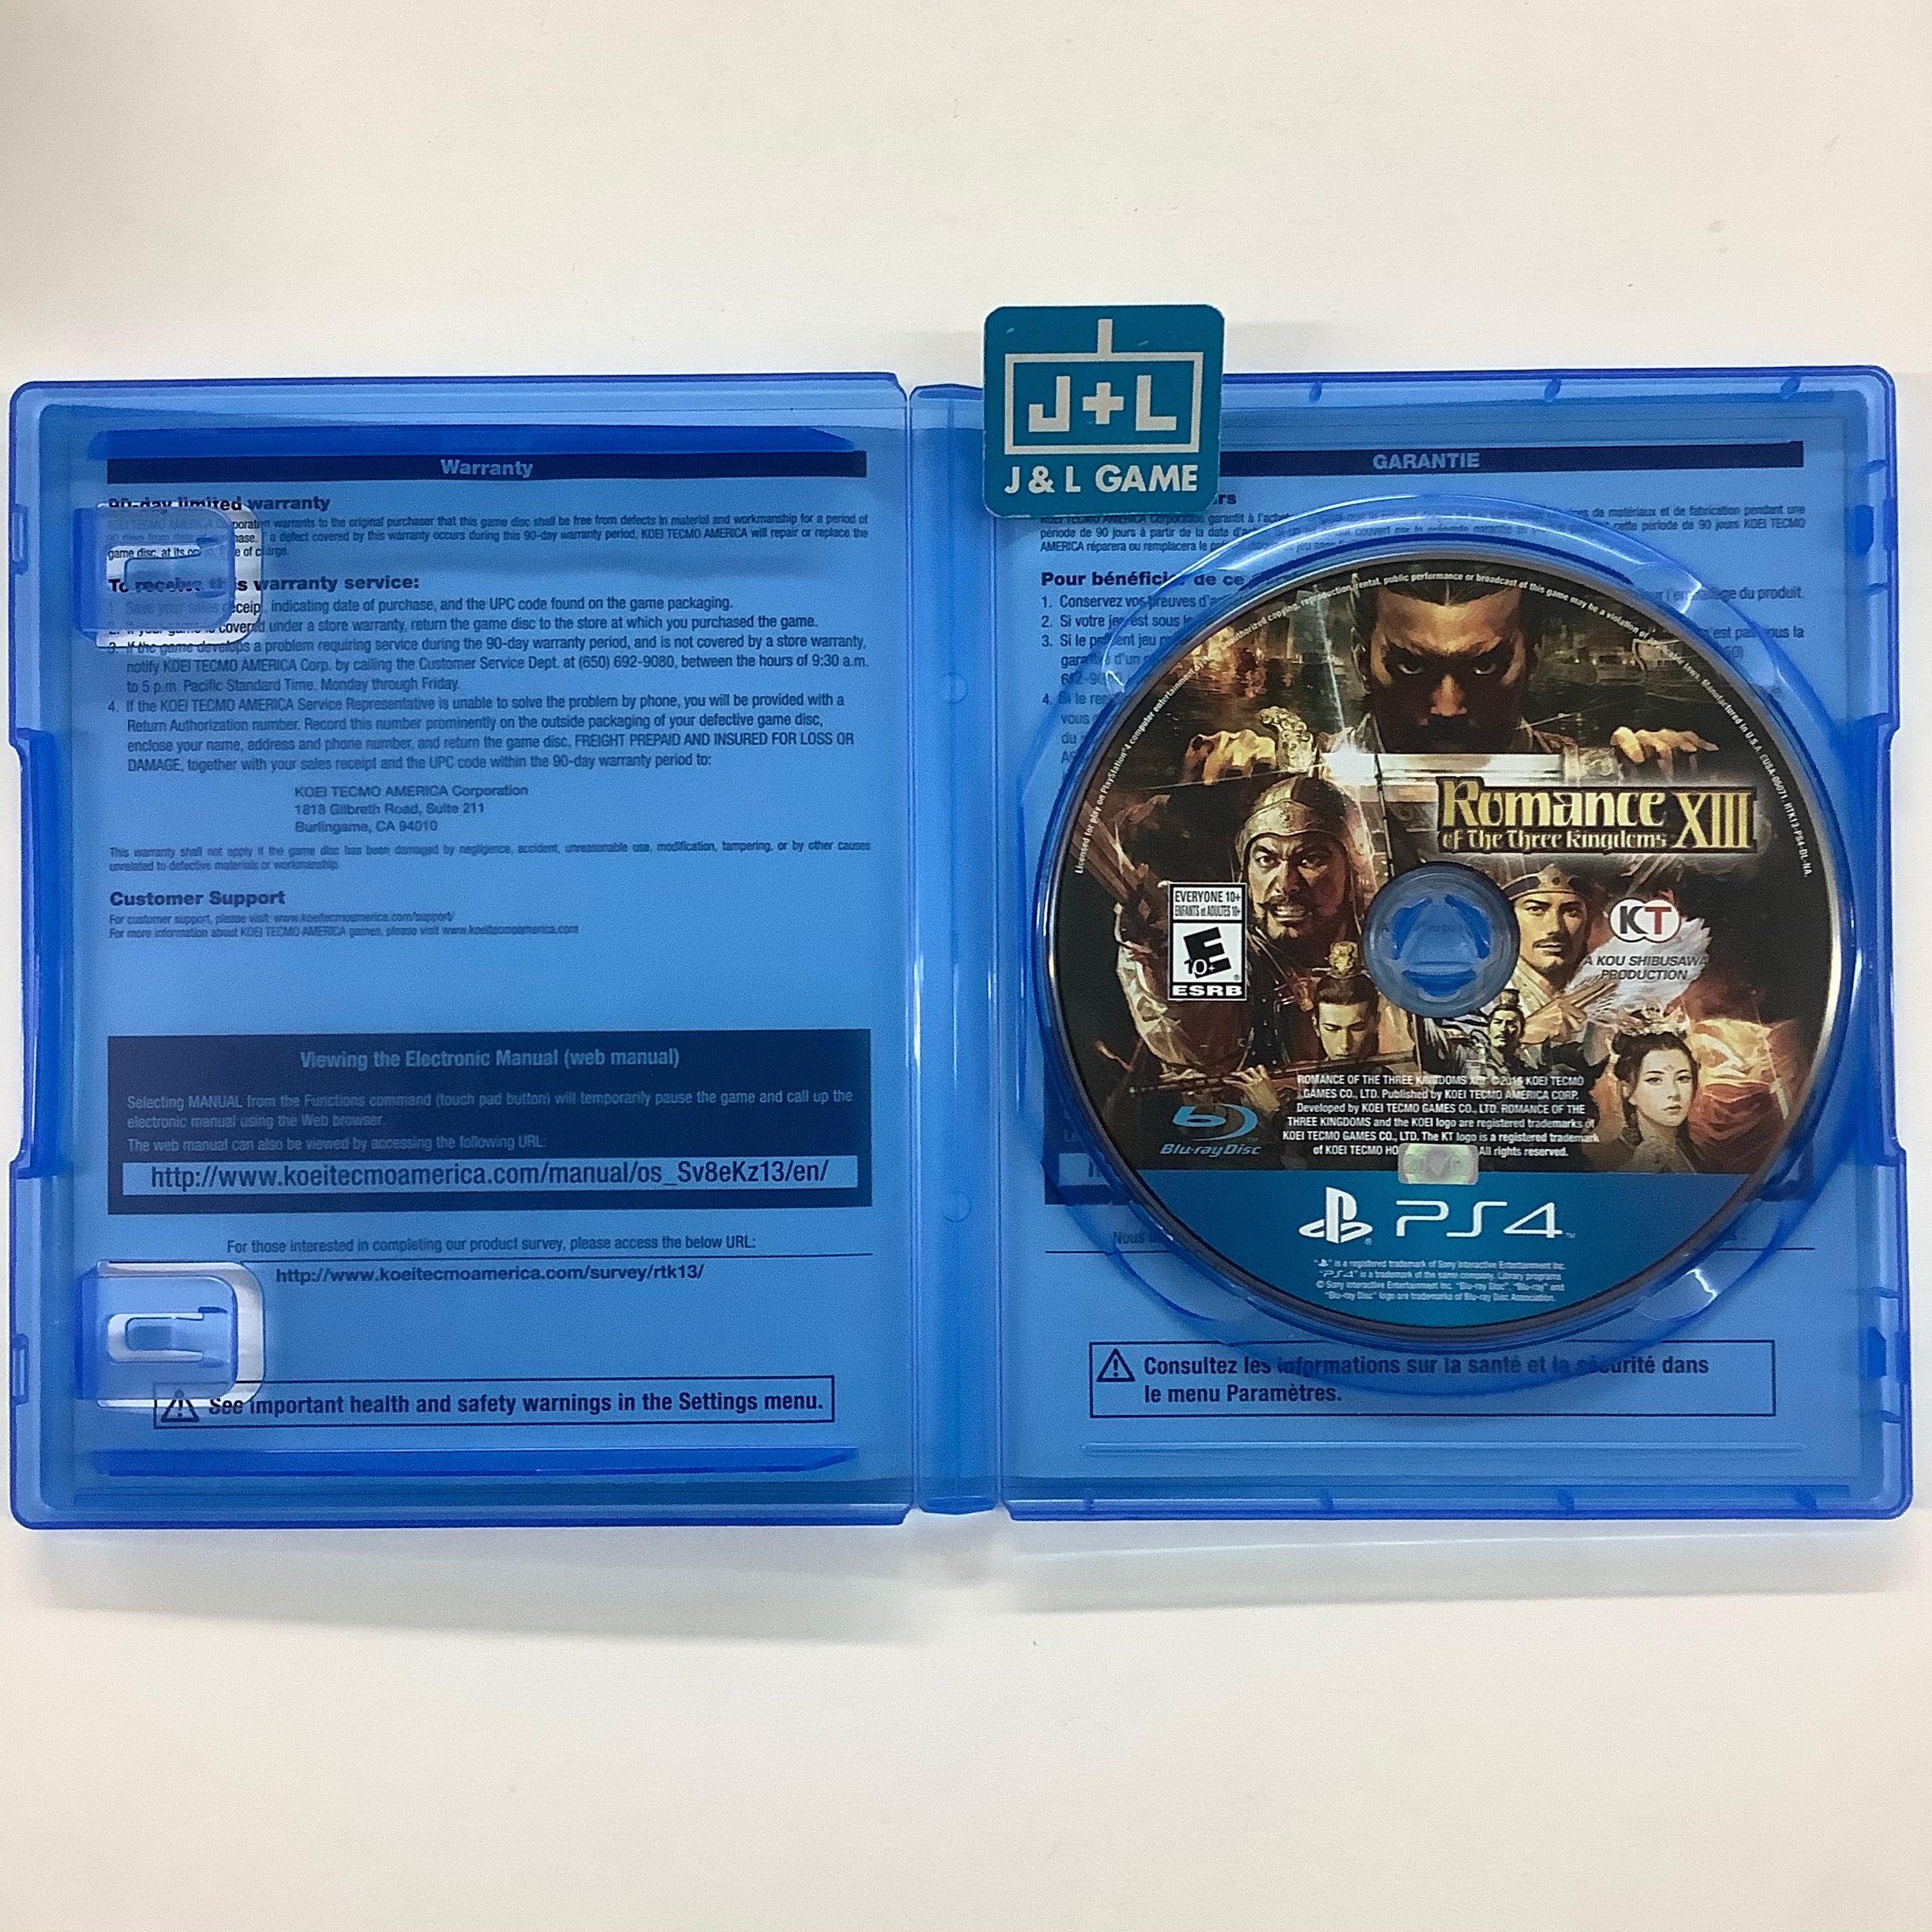 Romance of the Three Kingdoms XIII - (PS4) PlayStation 4 [Pre-Owned] Video Games Koei Tecmo Games   